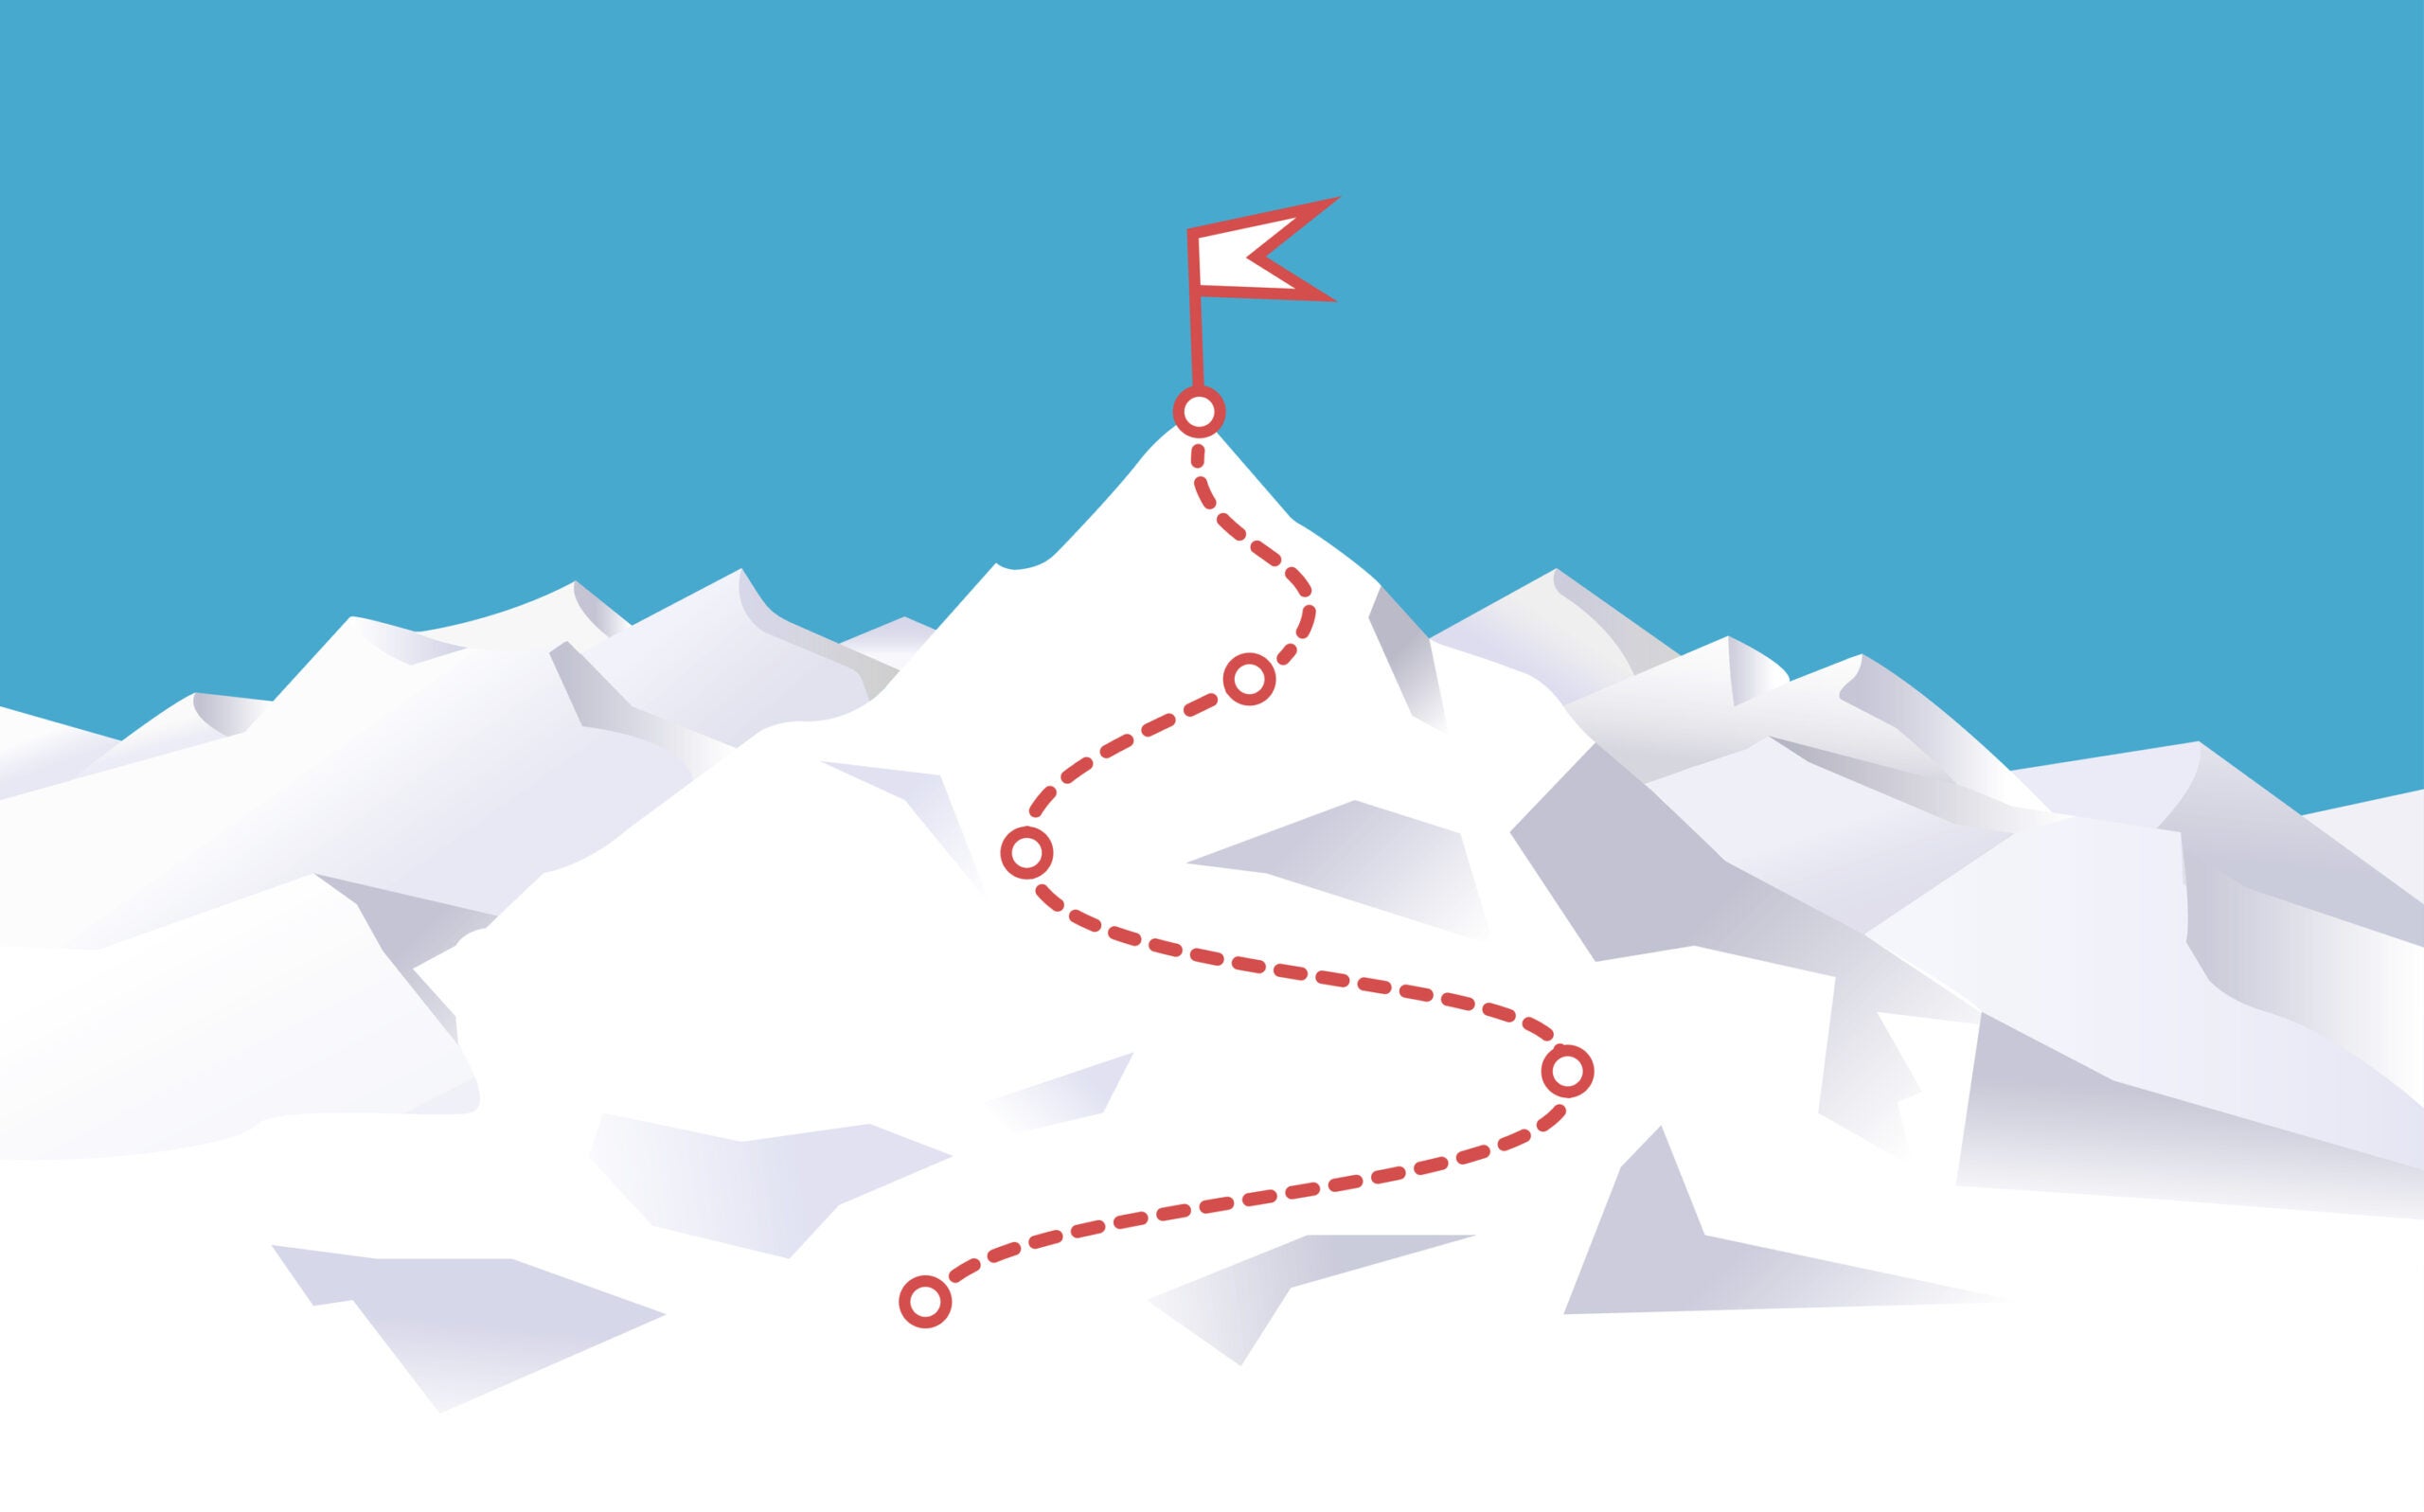 Mountain climbing route to peak. Way to success. Way to top. Business journey path in progress to success vector concept. Mountain peak, climbing route to top rock - vector illustration